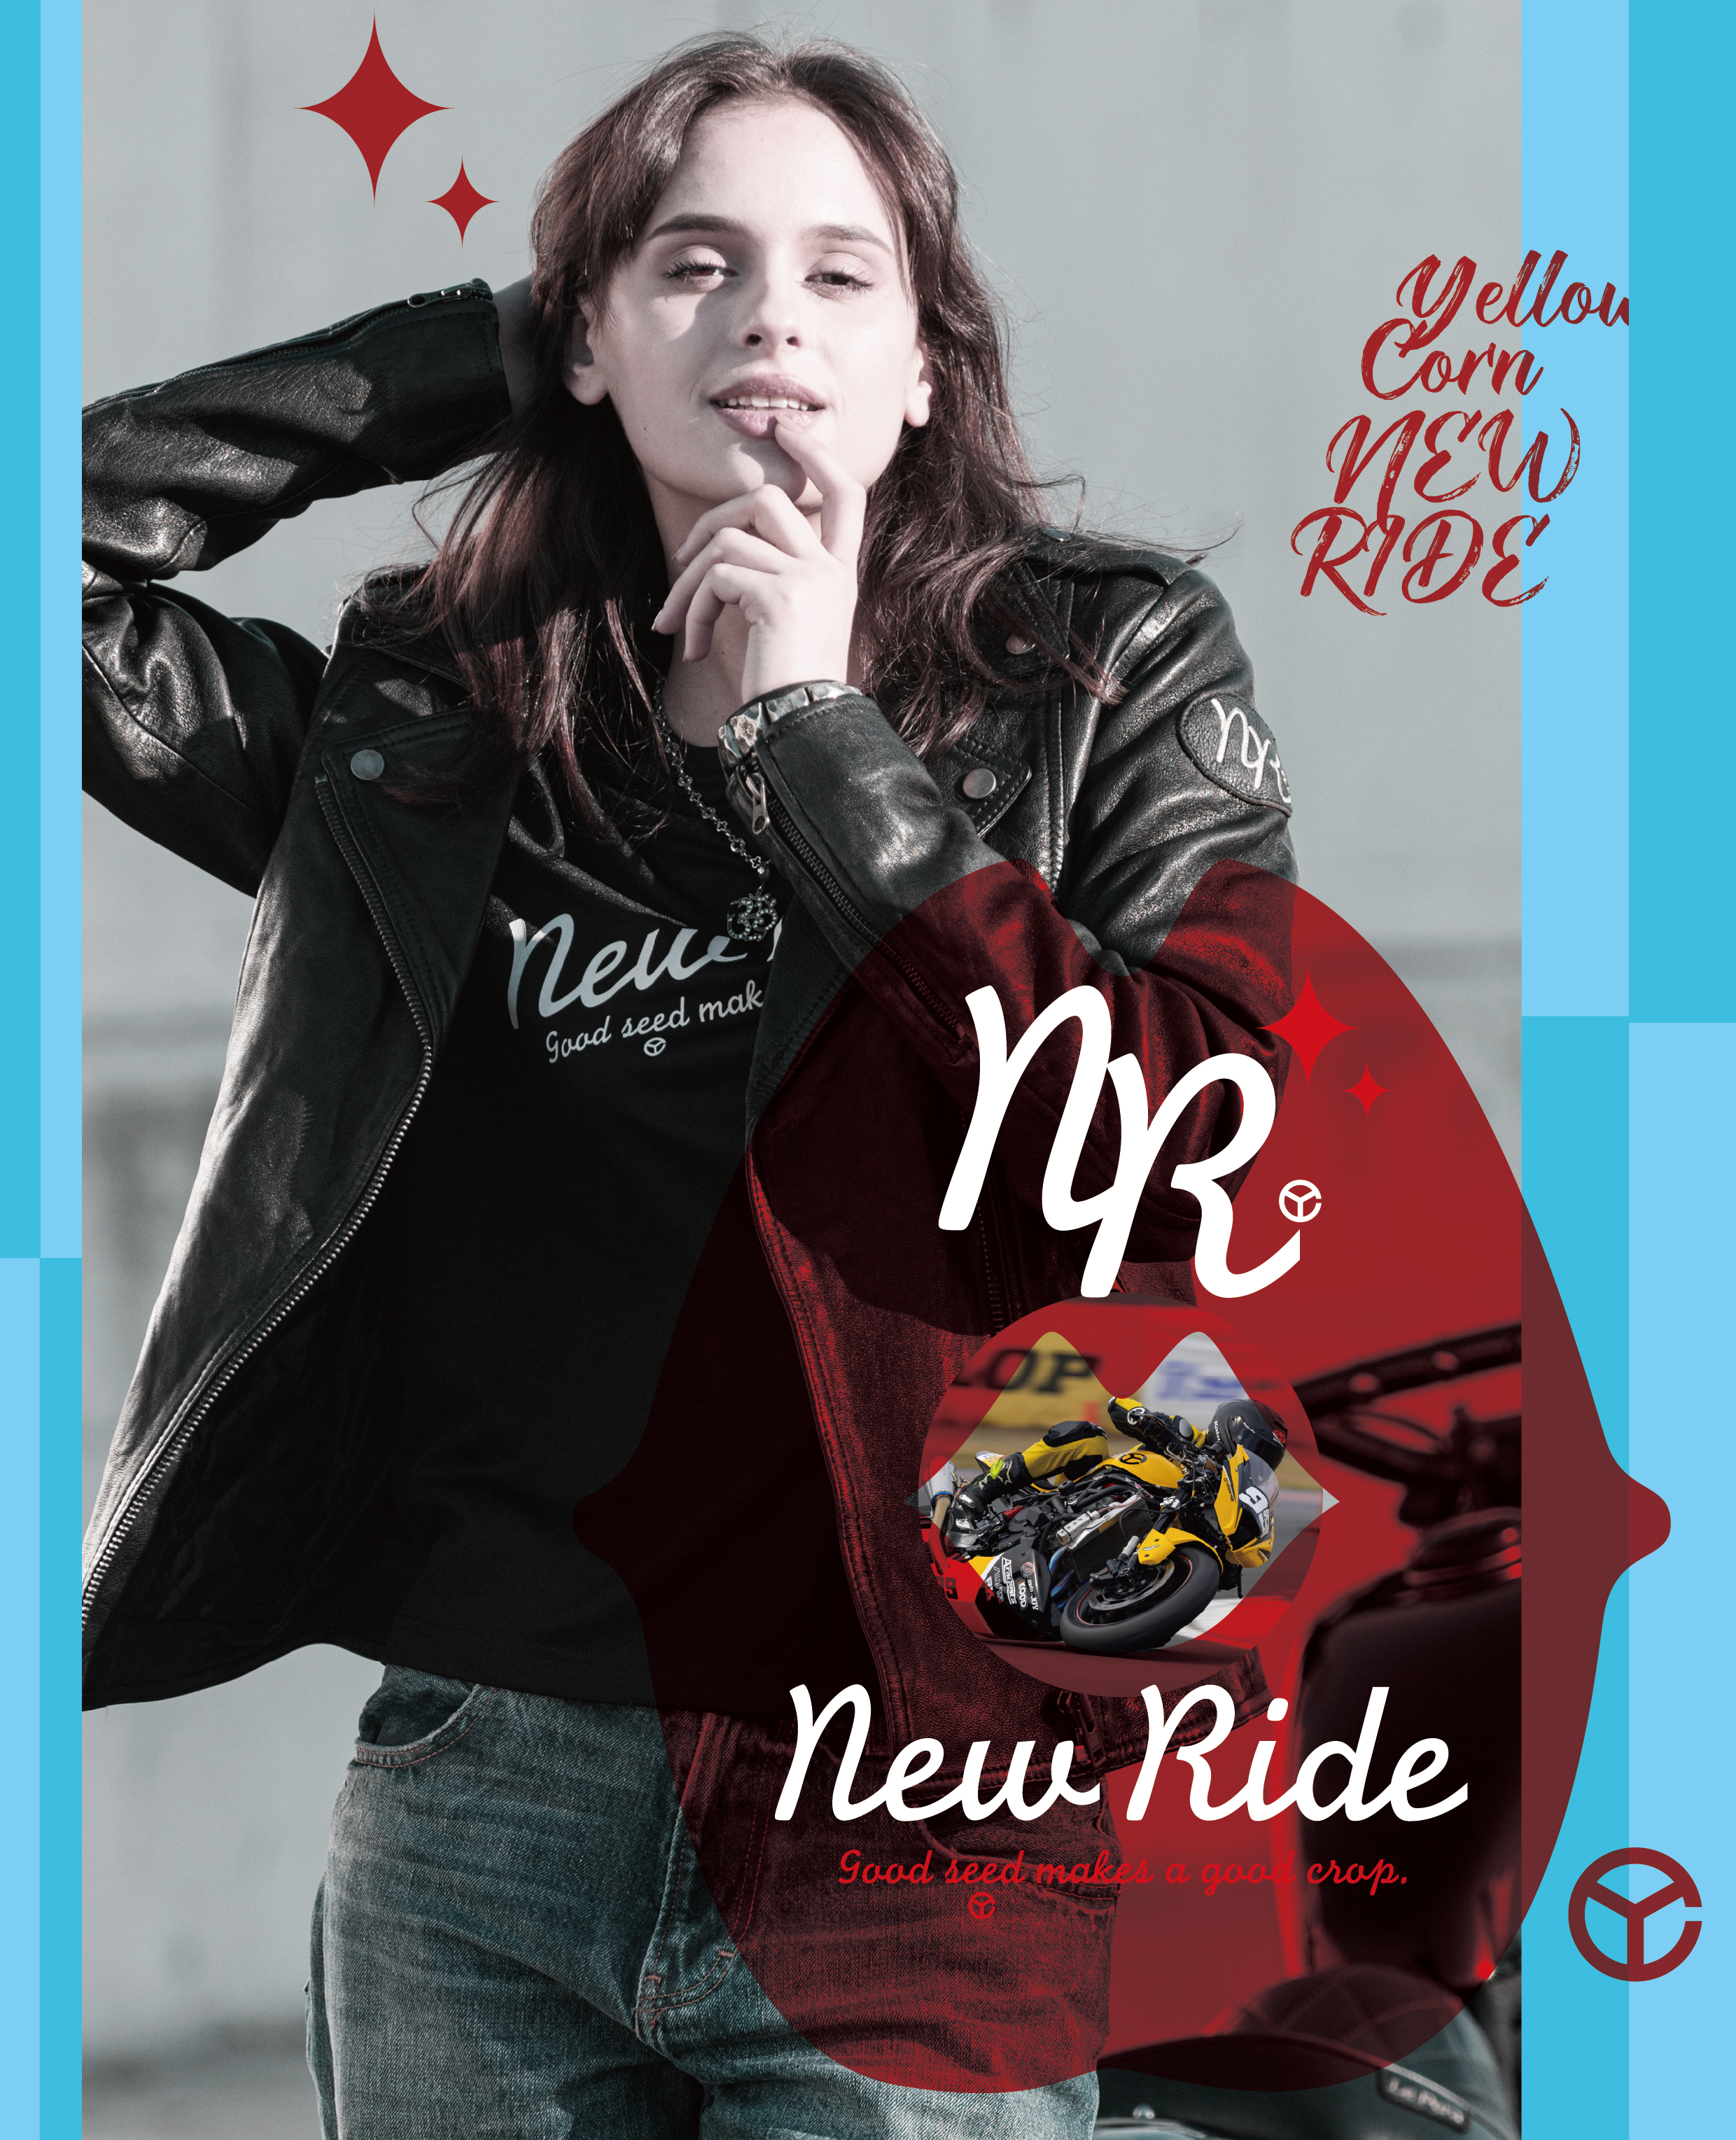 NEW RIDE Online Store